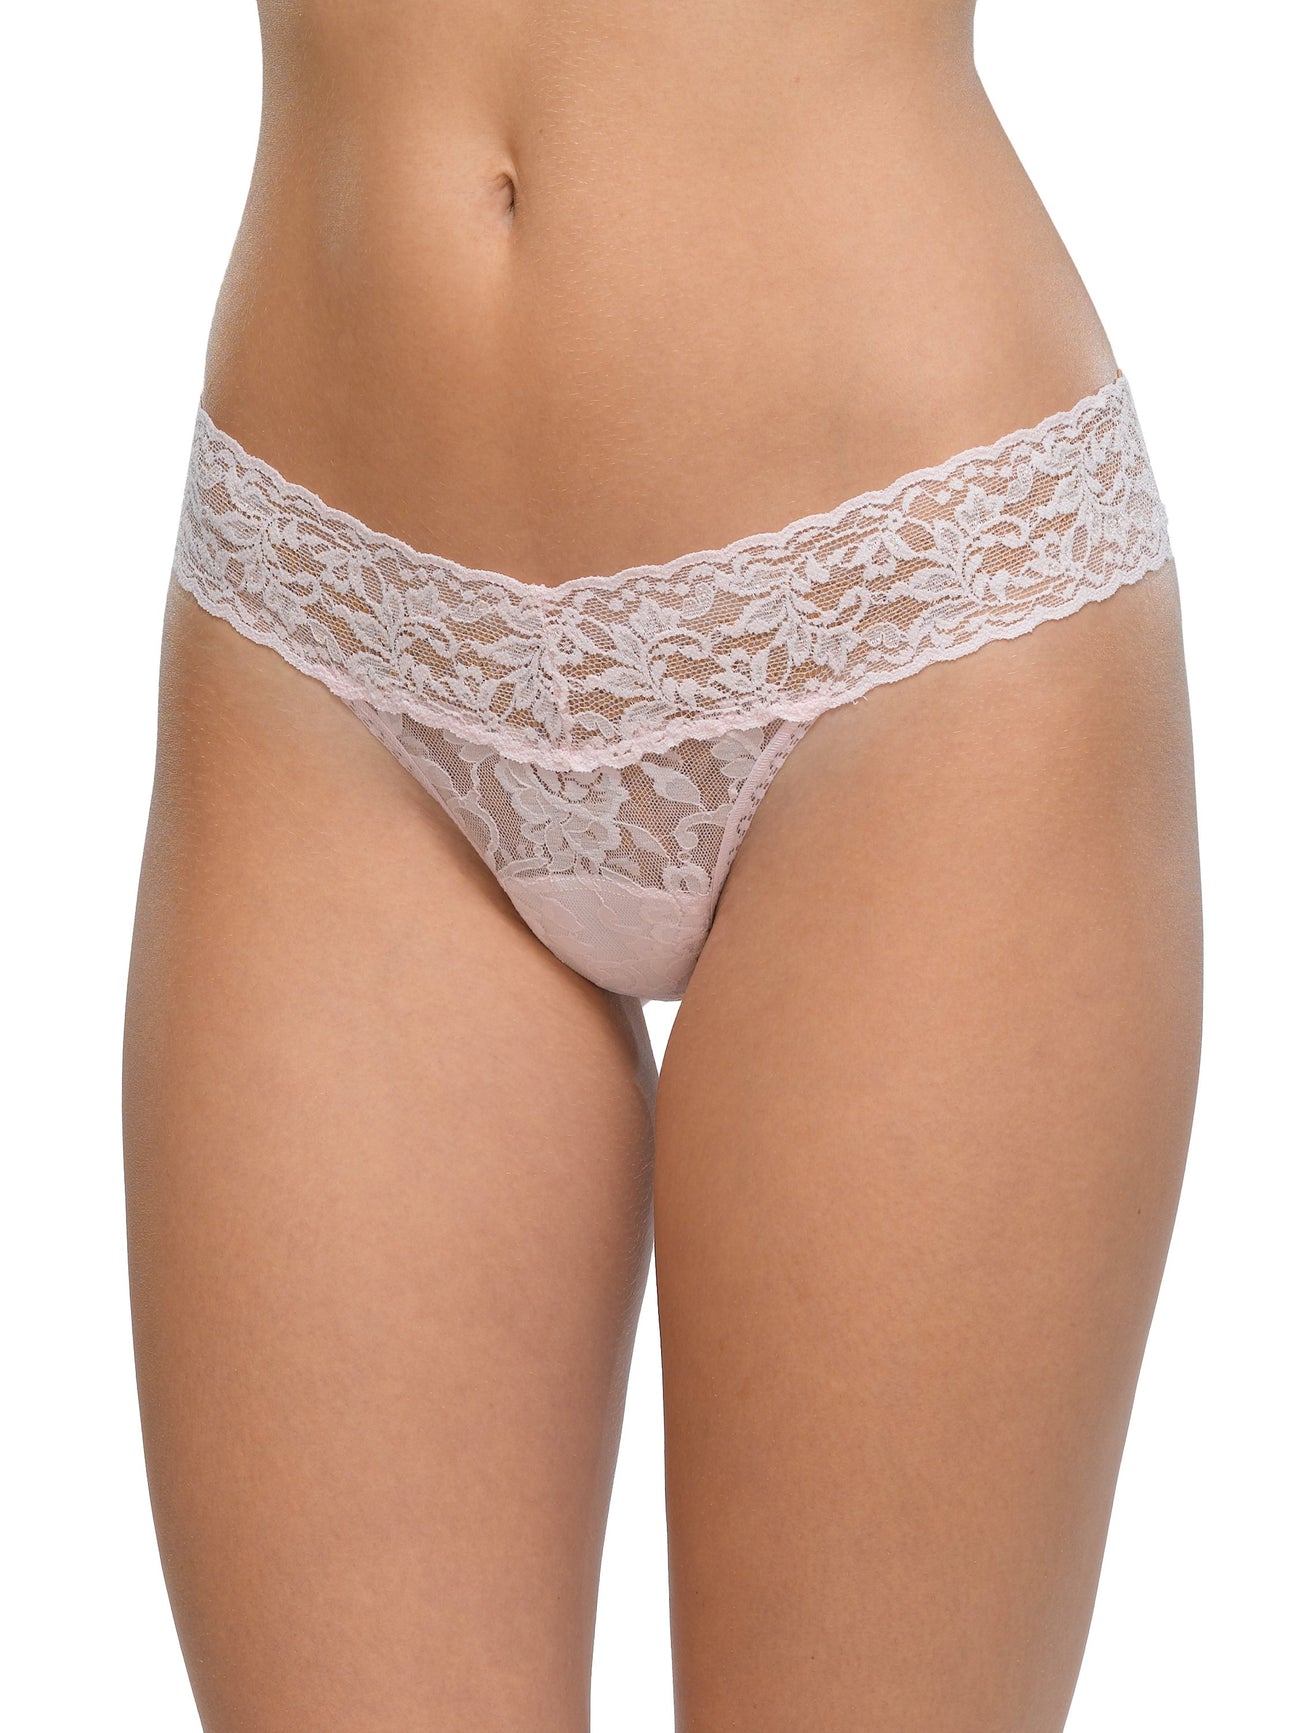 Hanky Panky Signature Lace Low Rise Thong White